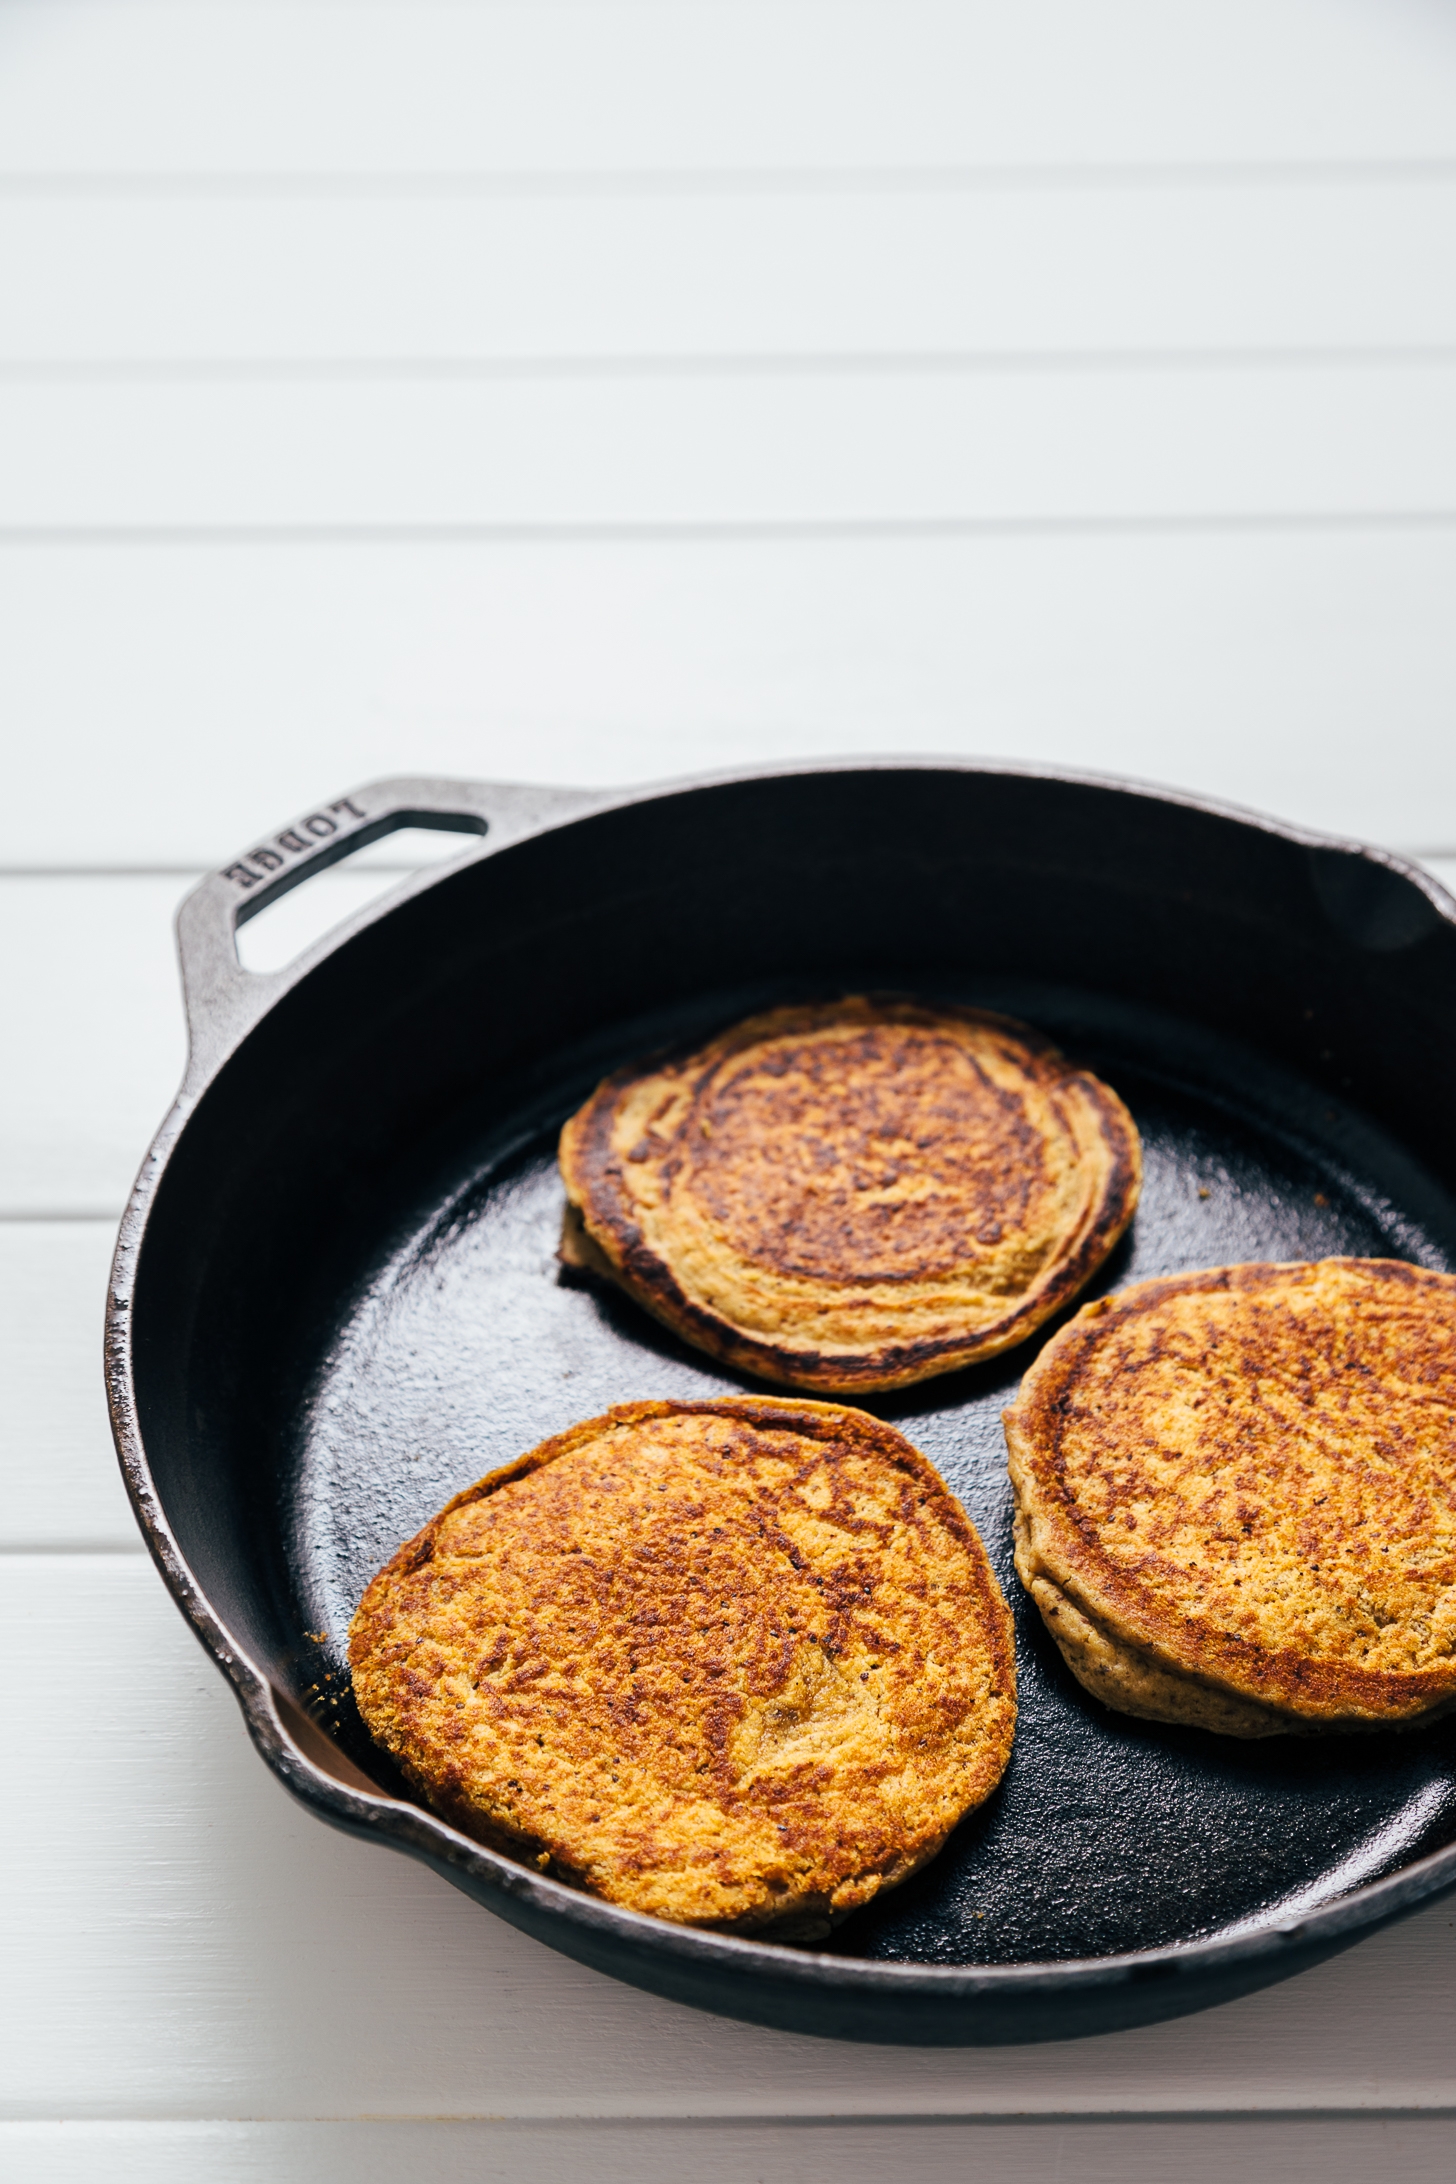 Cooking vegan Peanut Butter Protein Pancakes in a cast-iron skillet